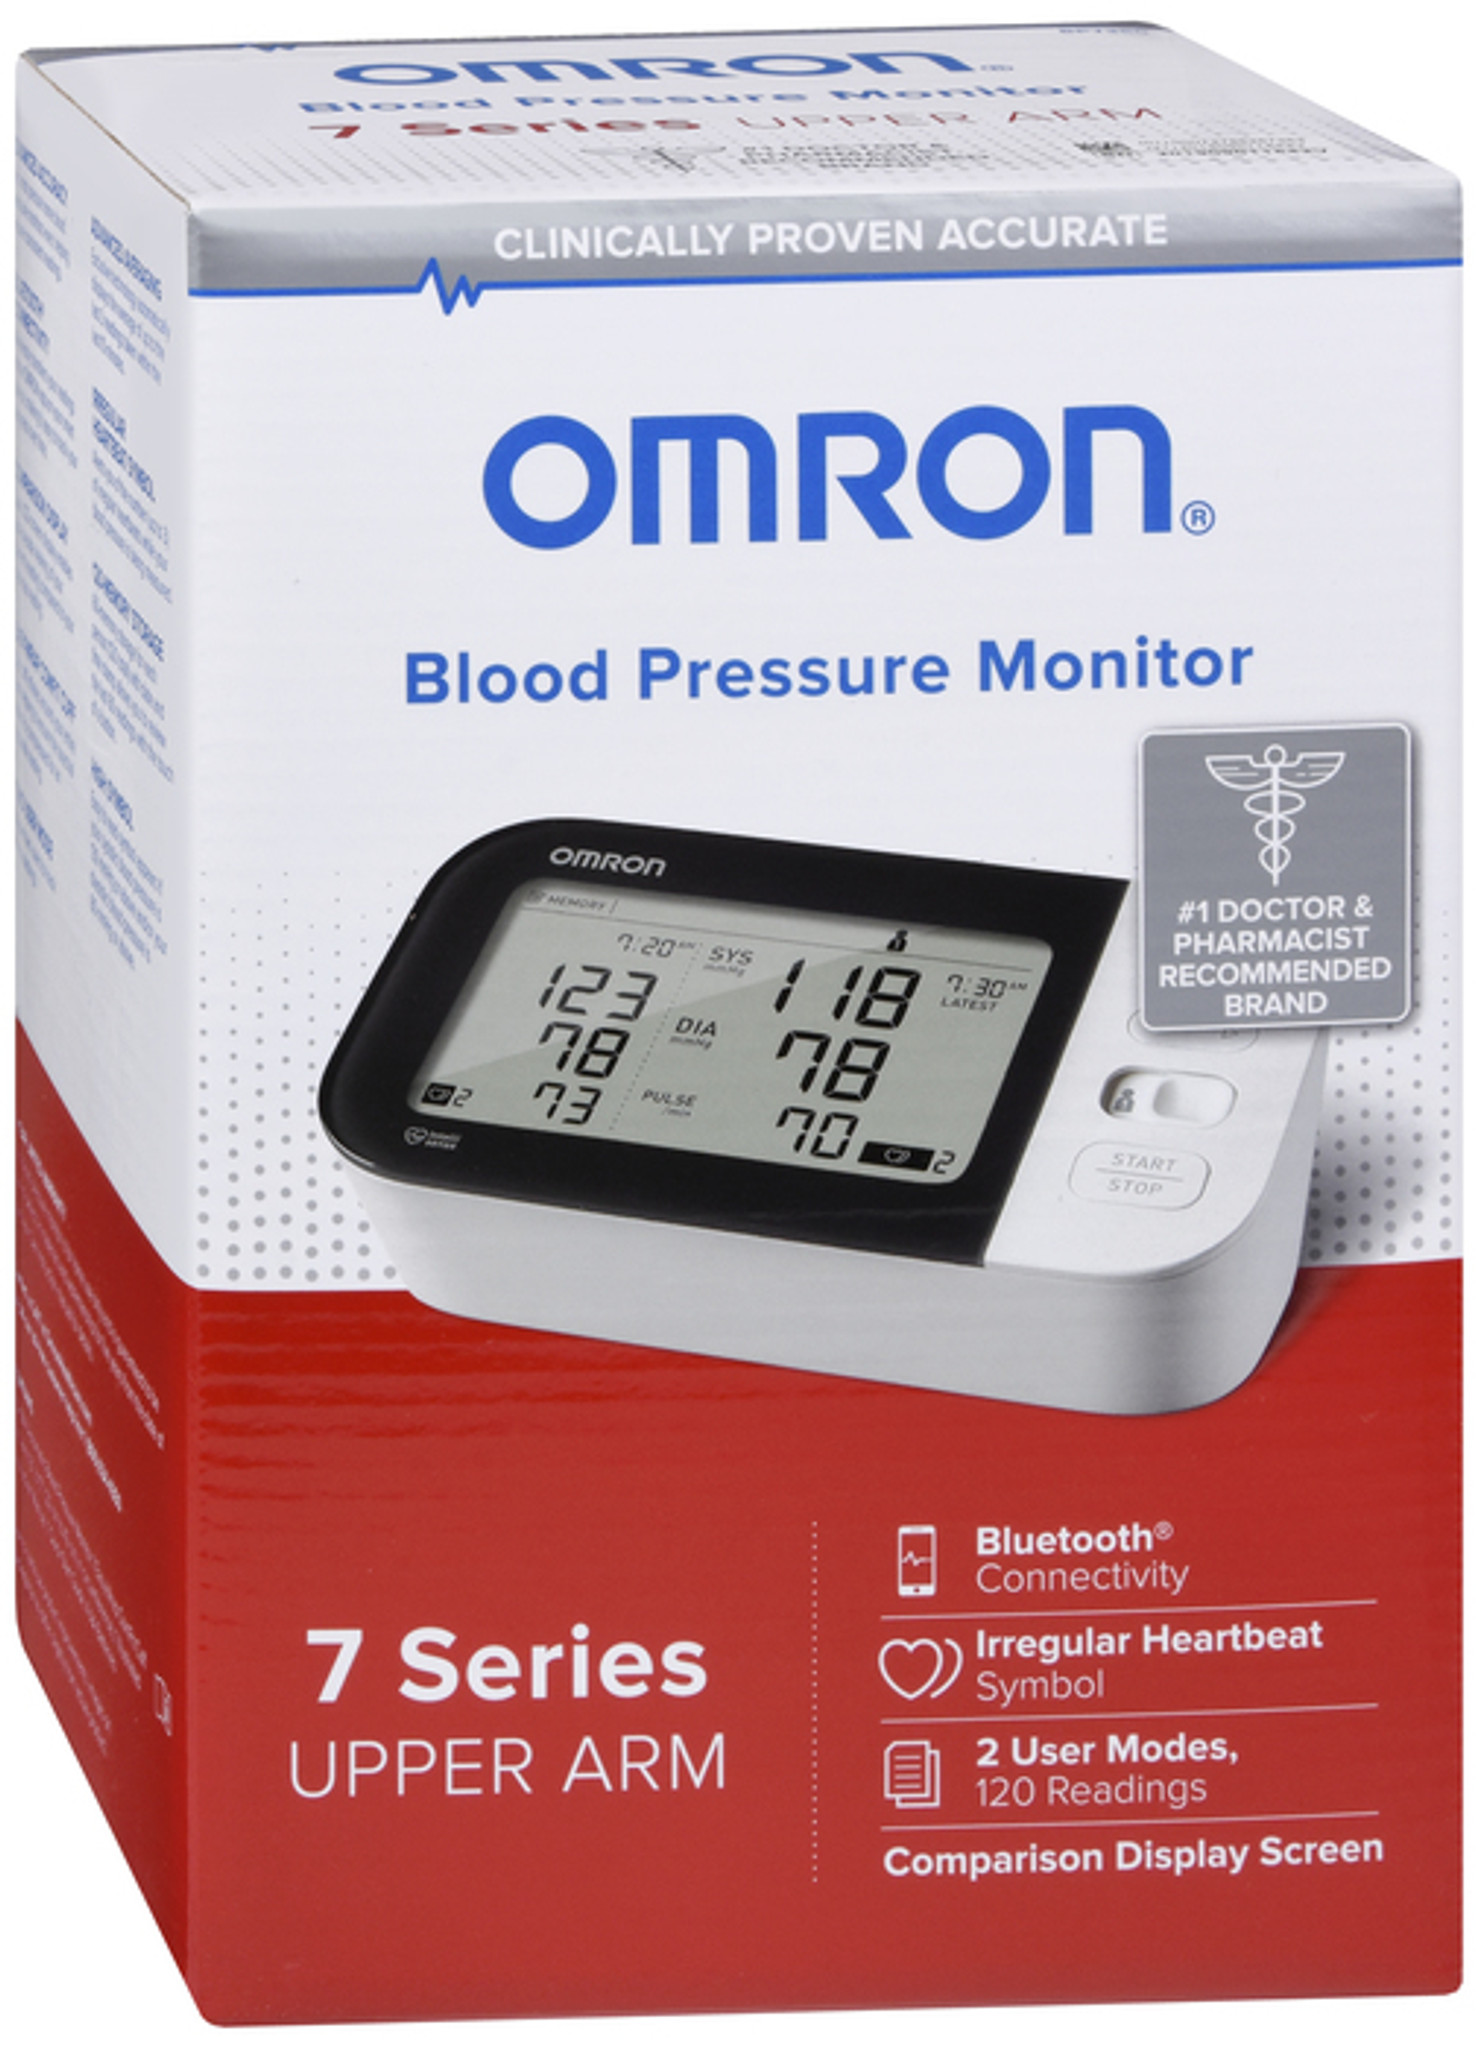 Omron Gold BP5350 Arm Blood Pressure Monitor Review - My Health Devices